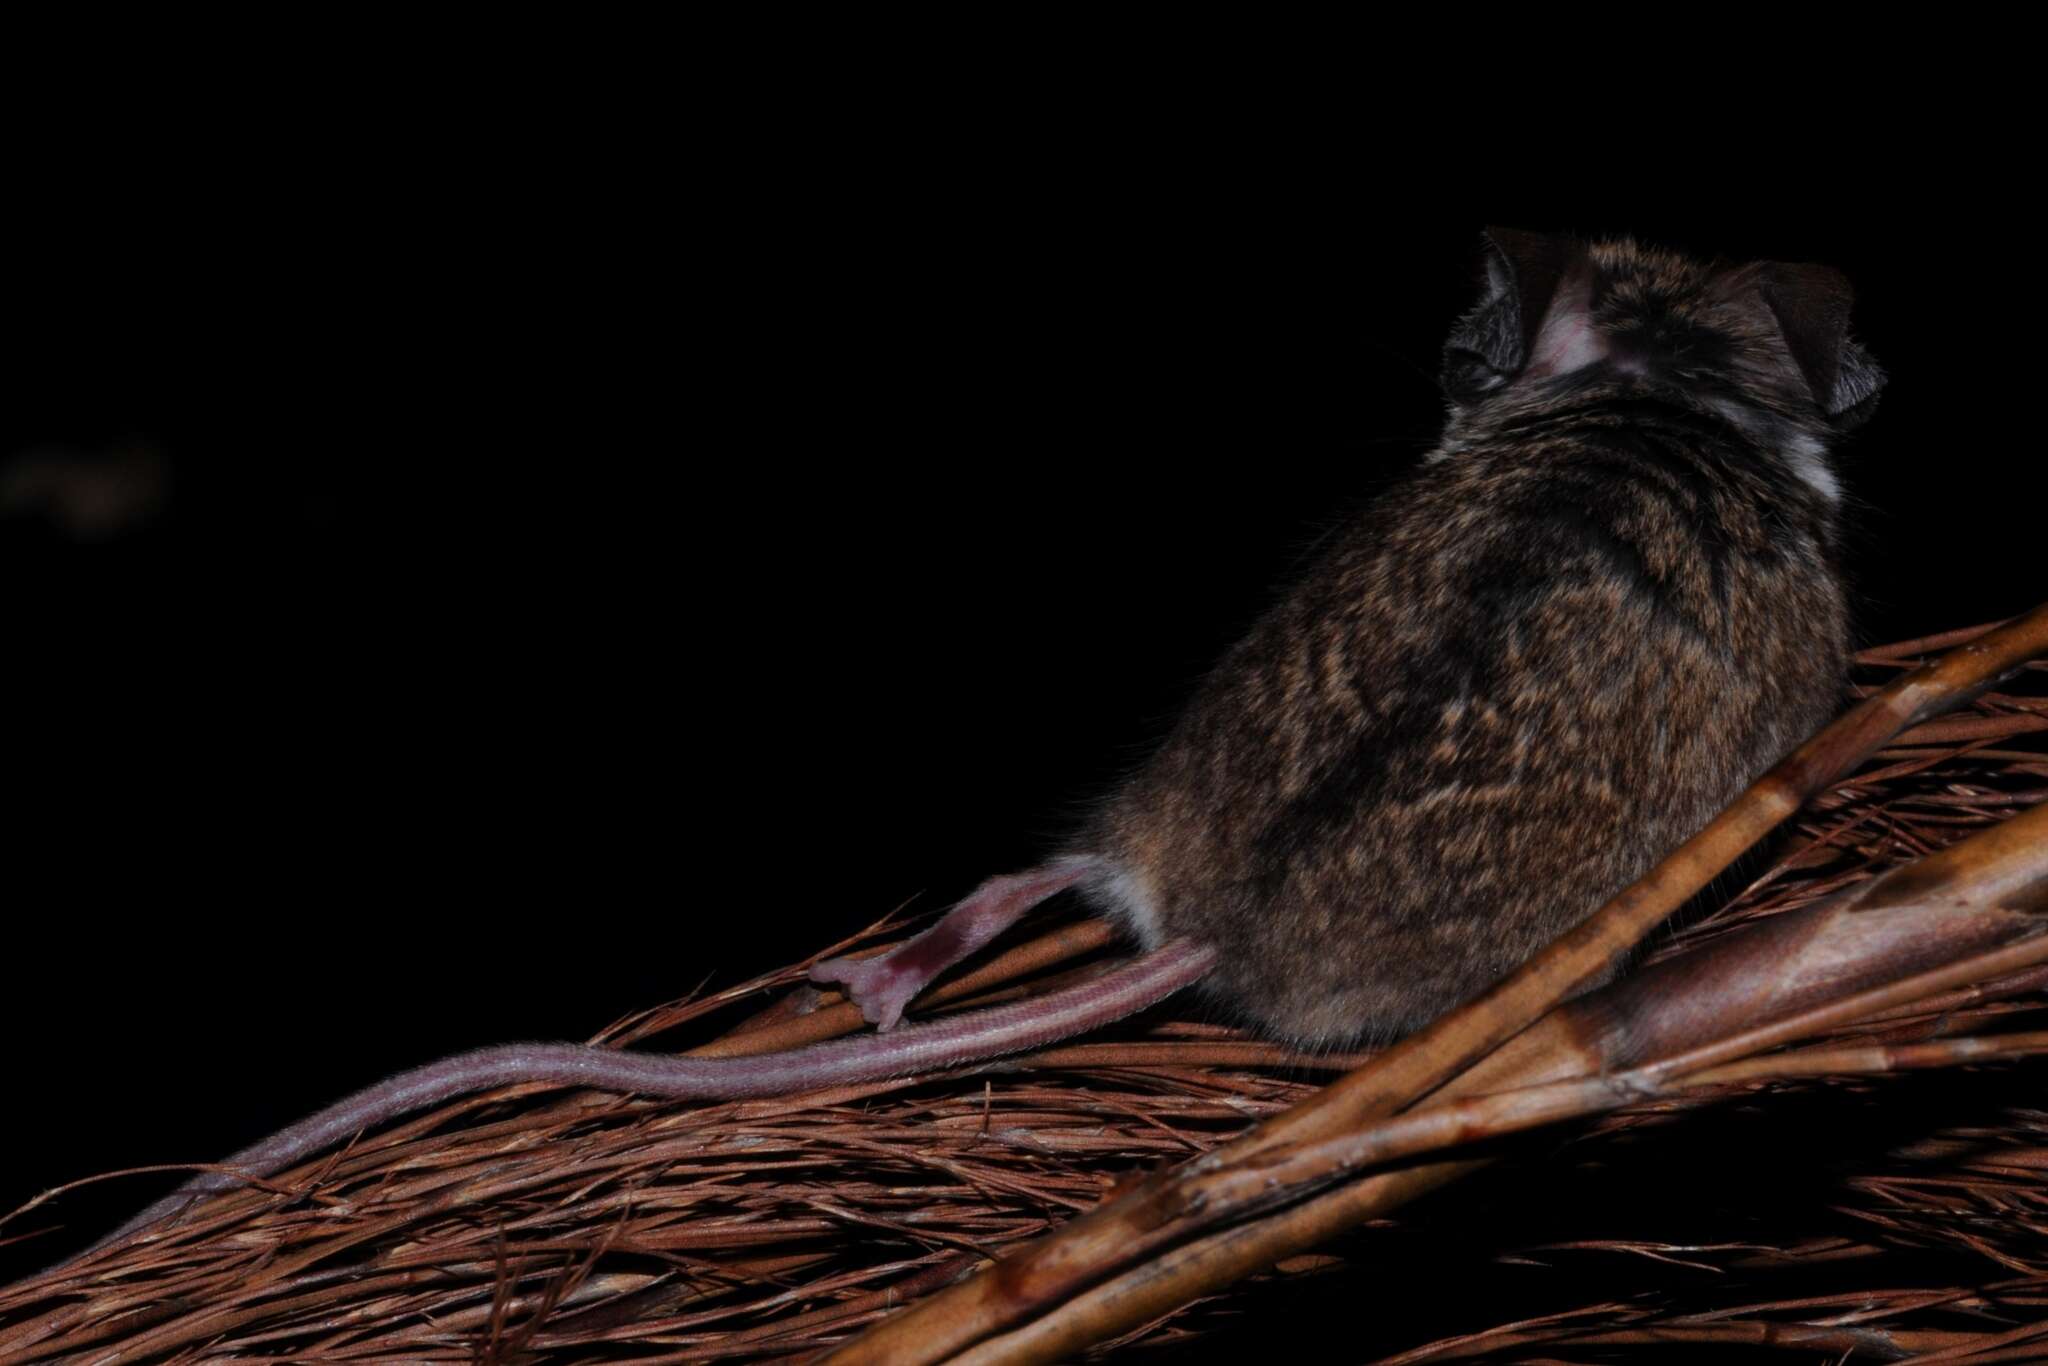 Image of Brants's African Climbing Mouse -- Brant's Climbing Mouse